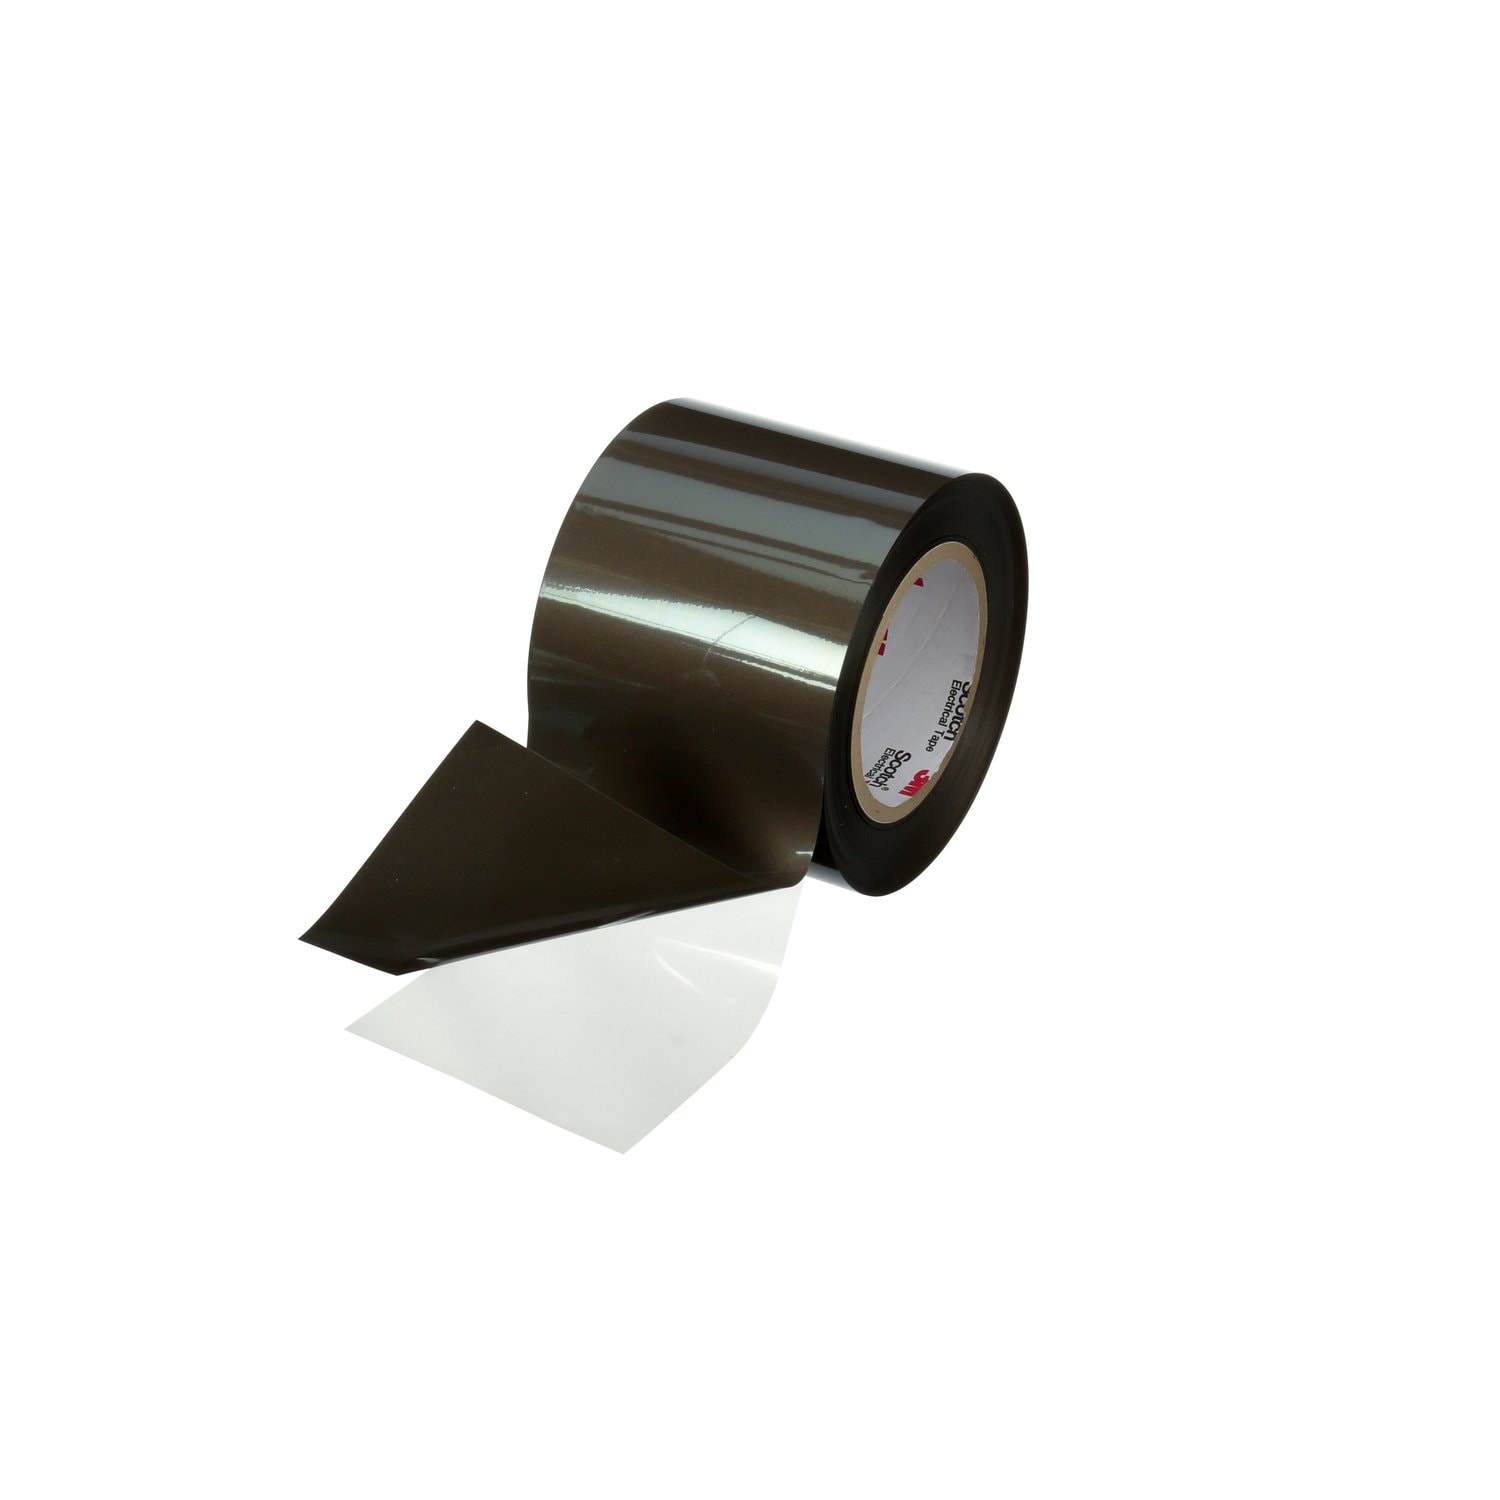 7100182974 - 3M Electrically Conductive Double-Sided Tape 9711S, 300 mm x 10 m,
100um